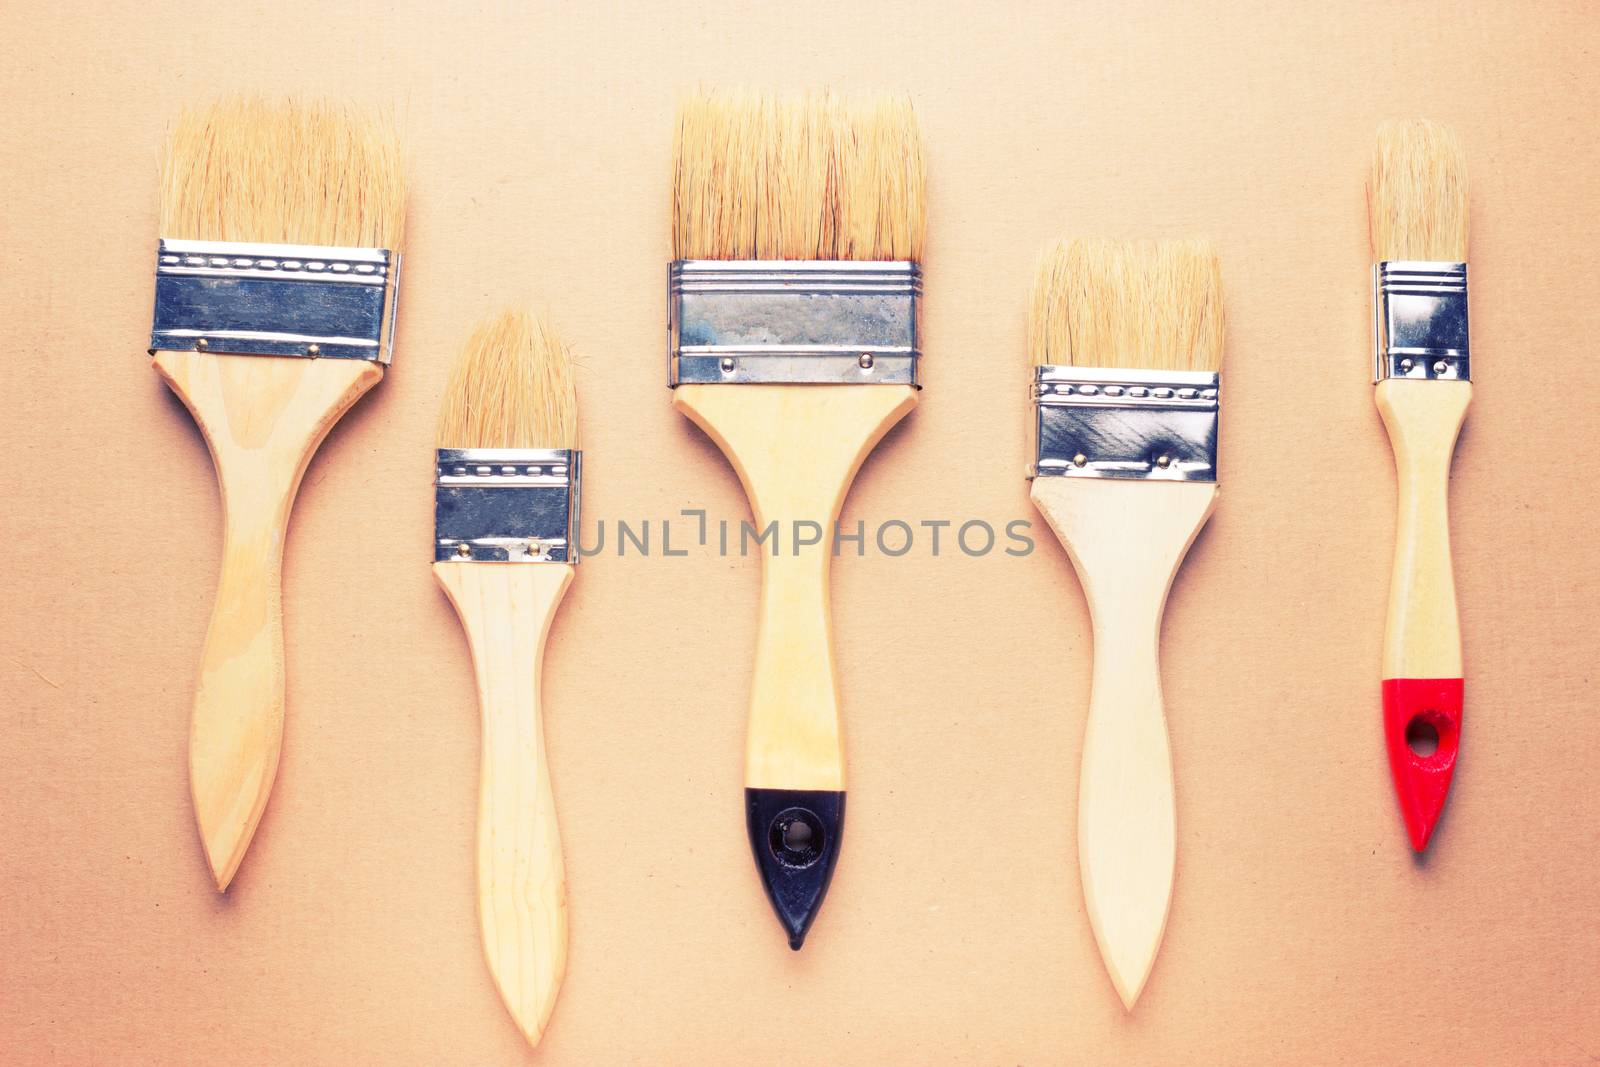 new different size paintbrushes on wood floor